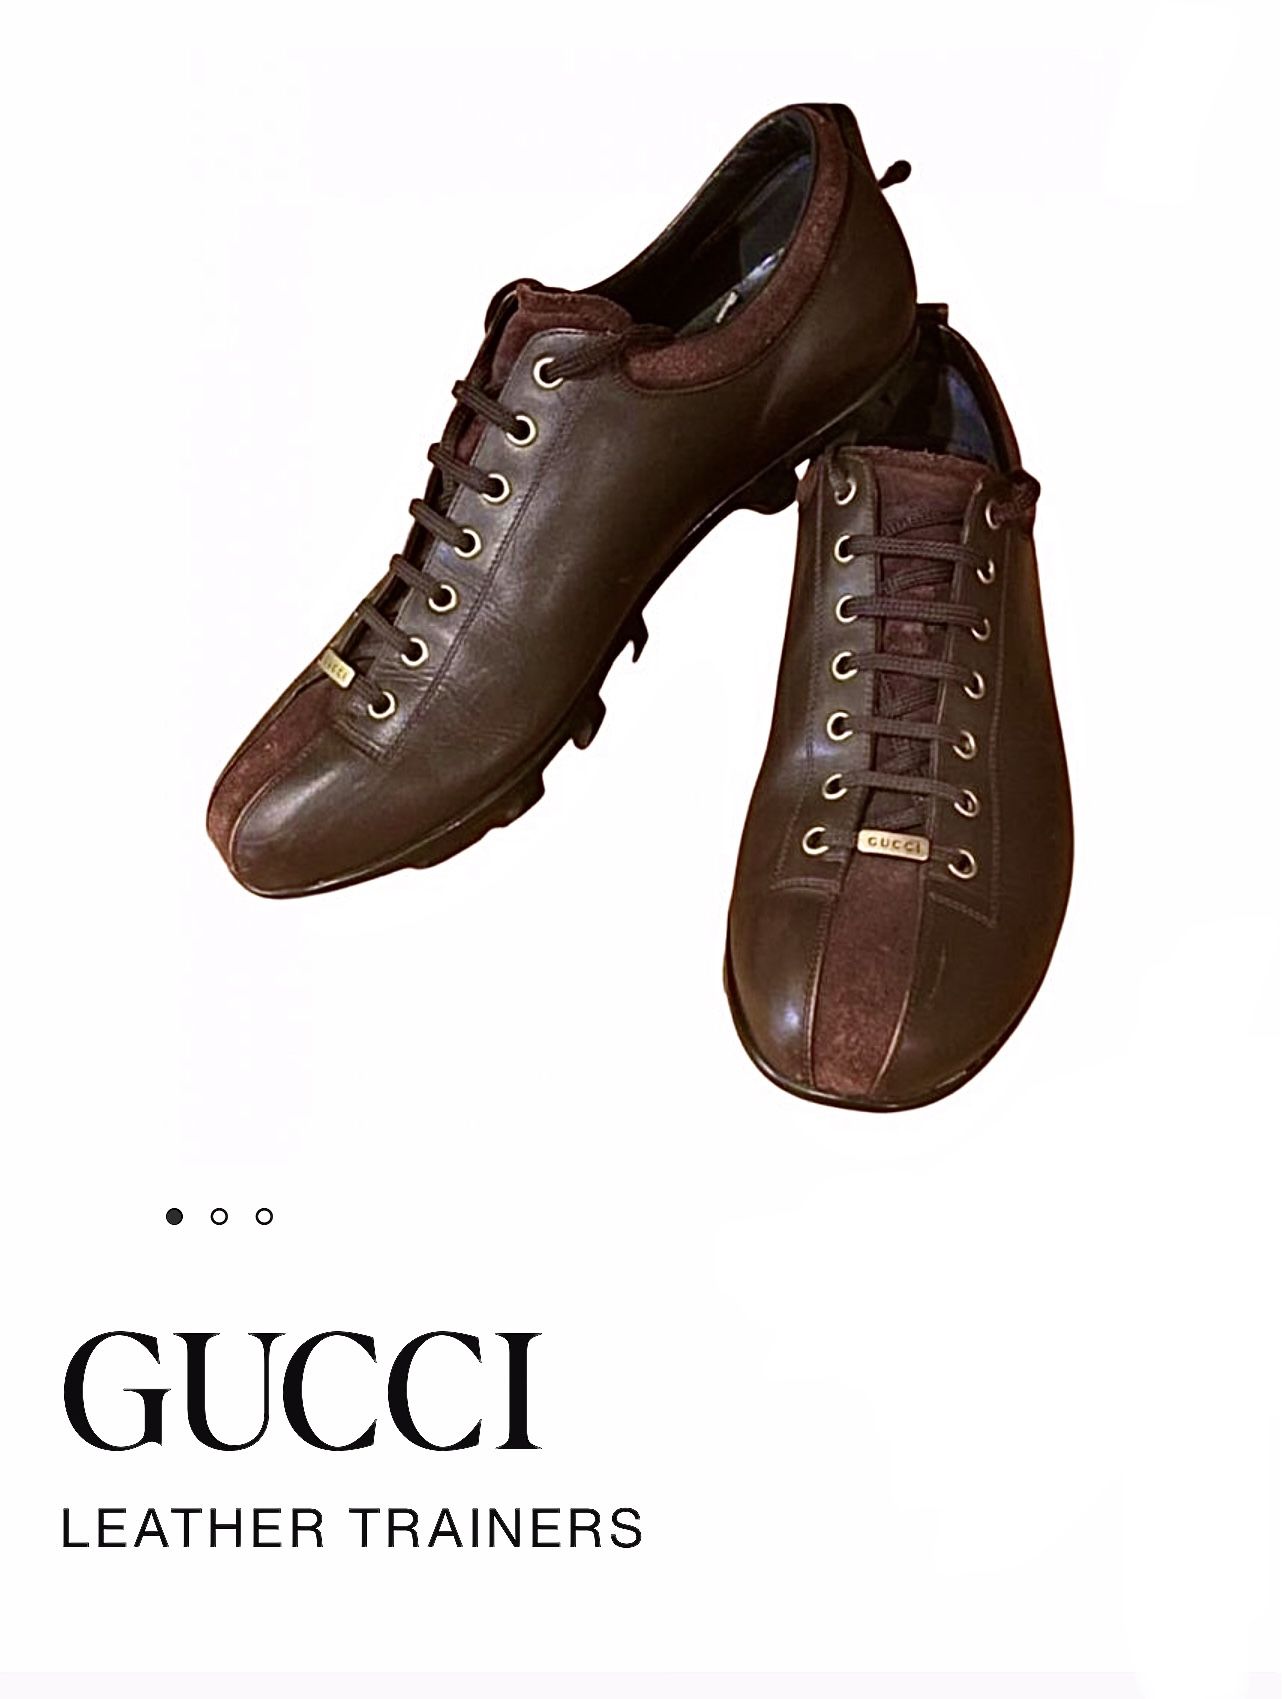 Gucci Leather Trainers